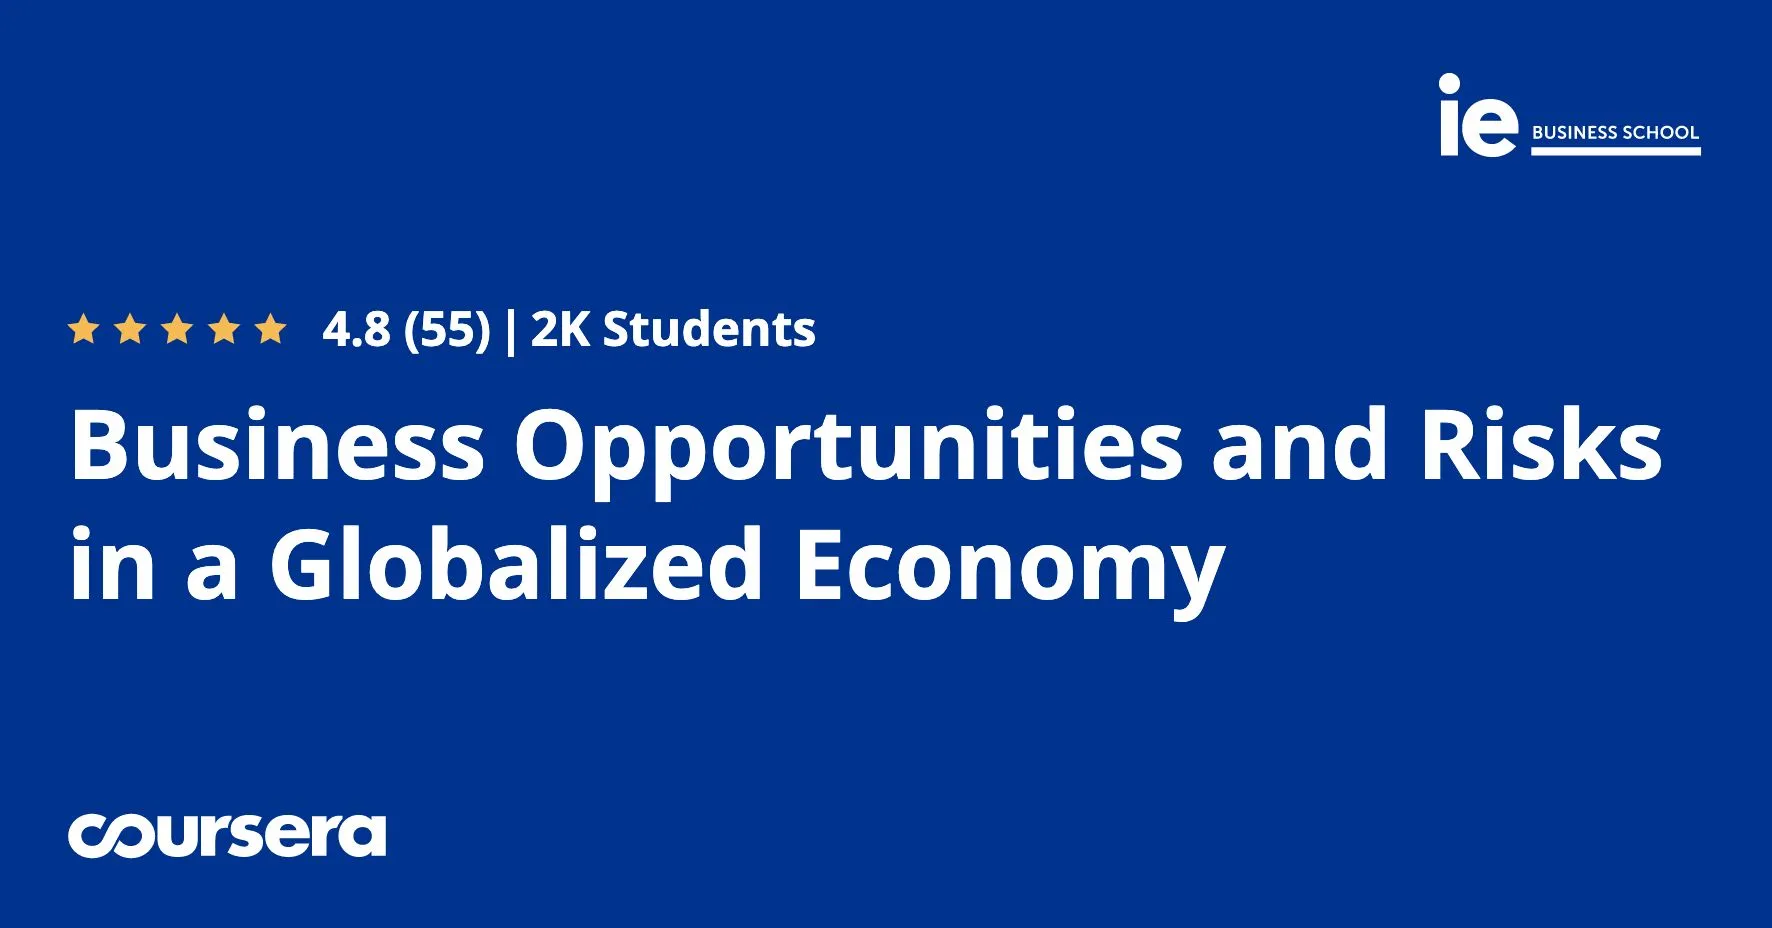 Business Opportunities and Risks in a Globalized Economy